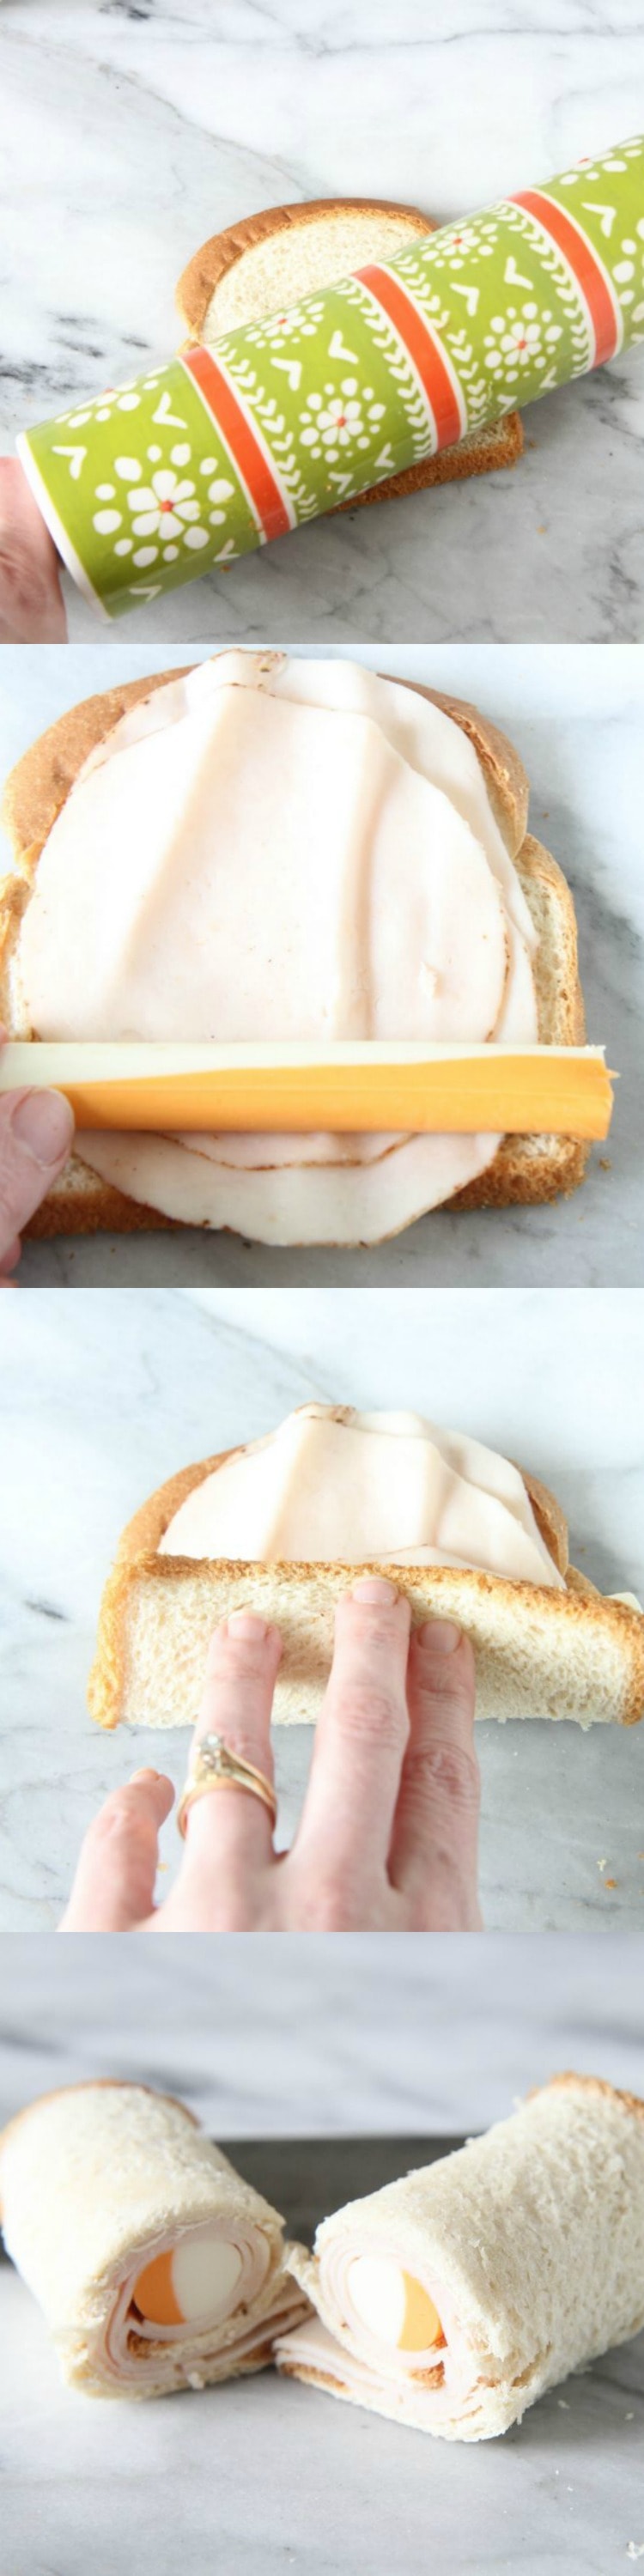 Sushi sandwich lunch hacks from MomAdvice.com